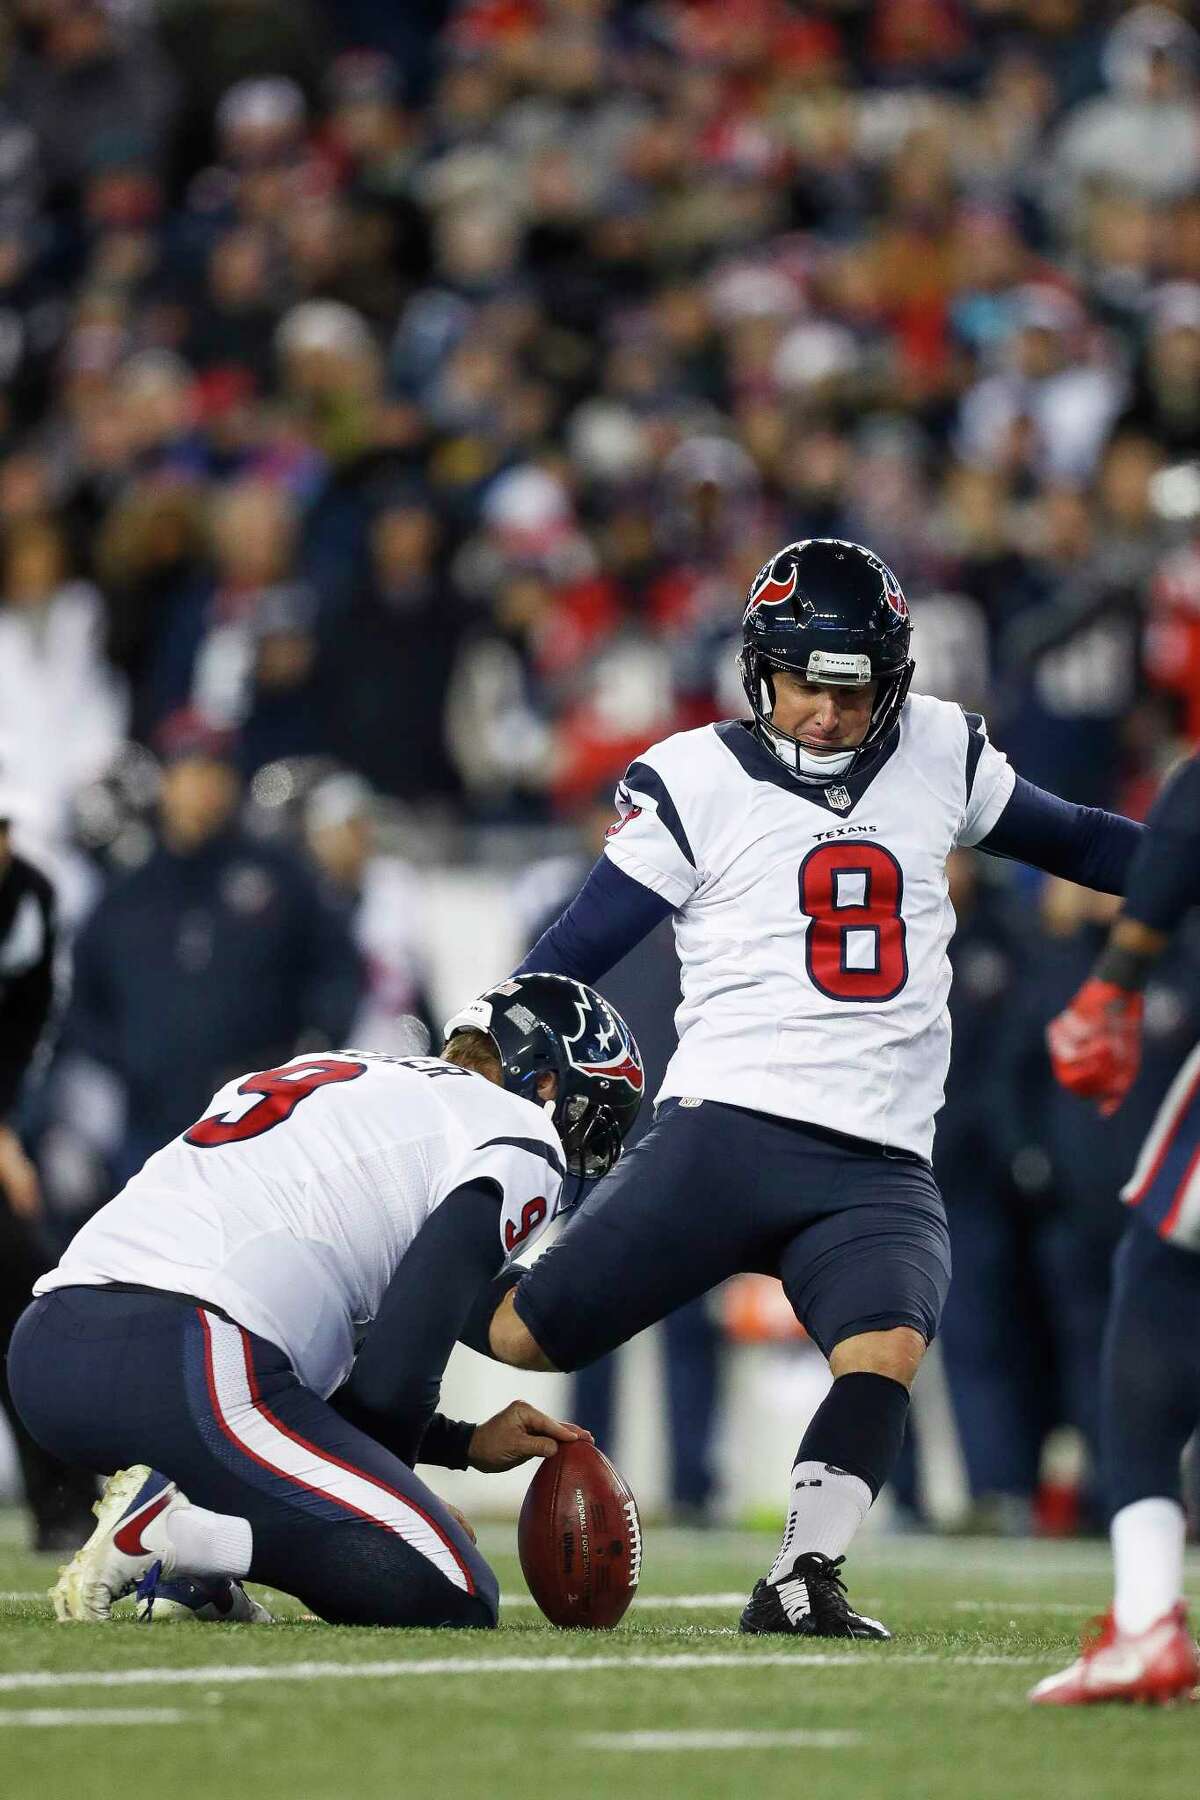 Houston Texans kicker Nick Novak (8) hits a field goal during the second quarter of an NFL divisional playoff game at Gillette Stadium, Saturday, January 14, 2017. ( Karen Warren / Houston Chronicle )